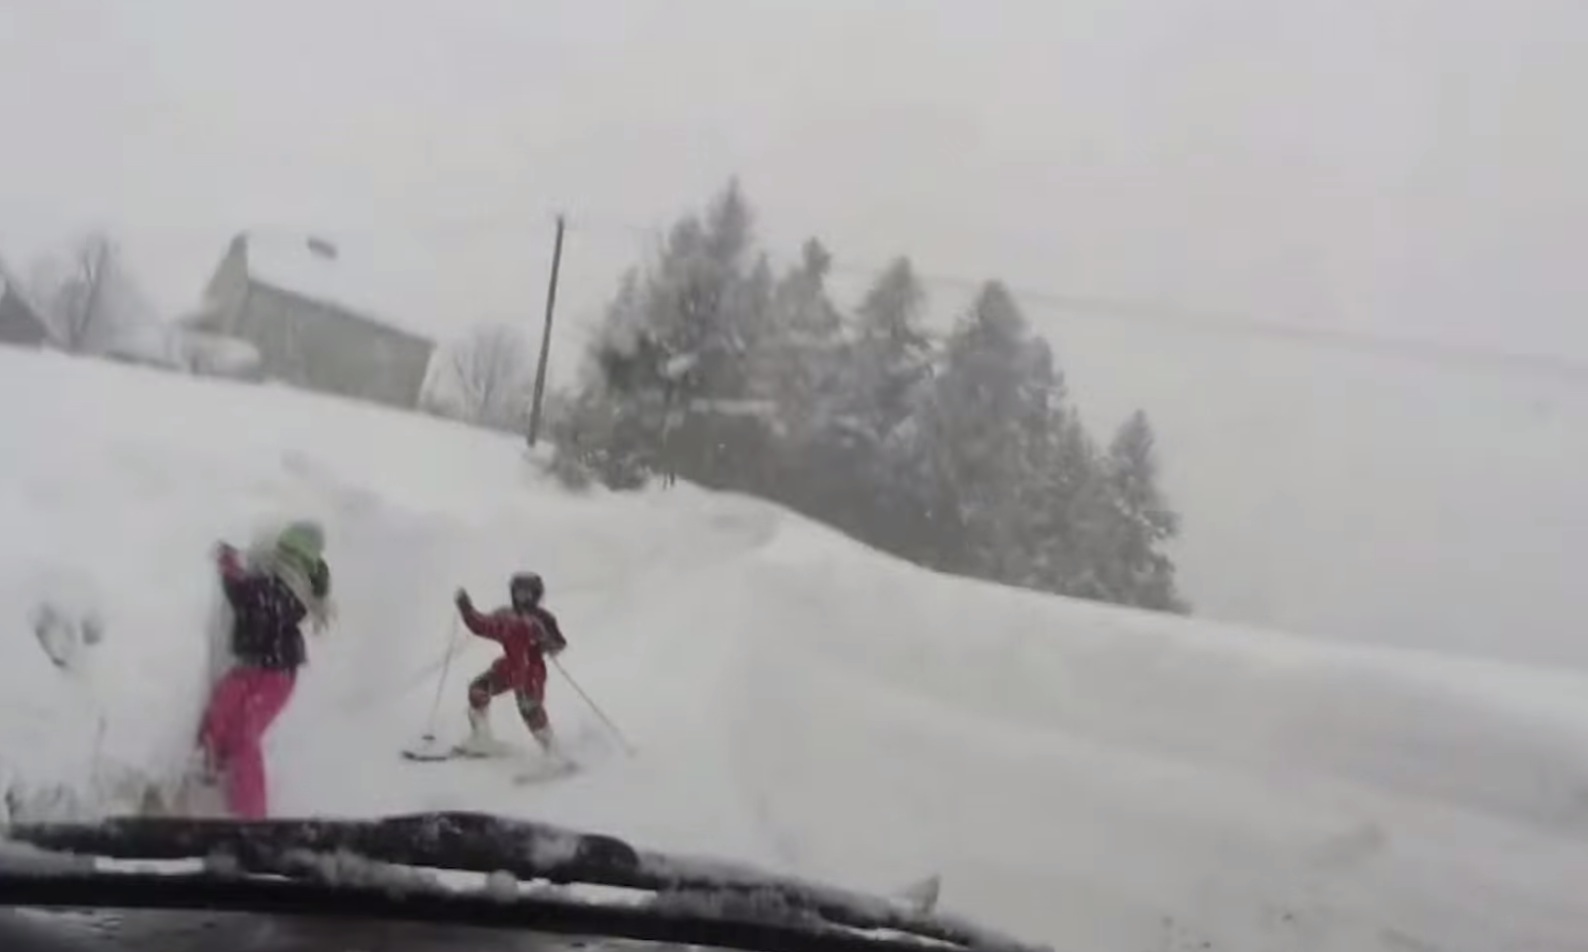 Naked guy skis down mountain and does a backflip -- but 